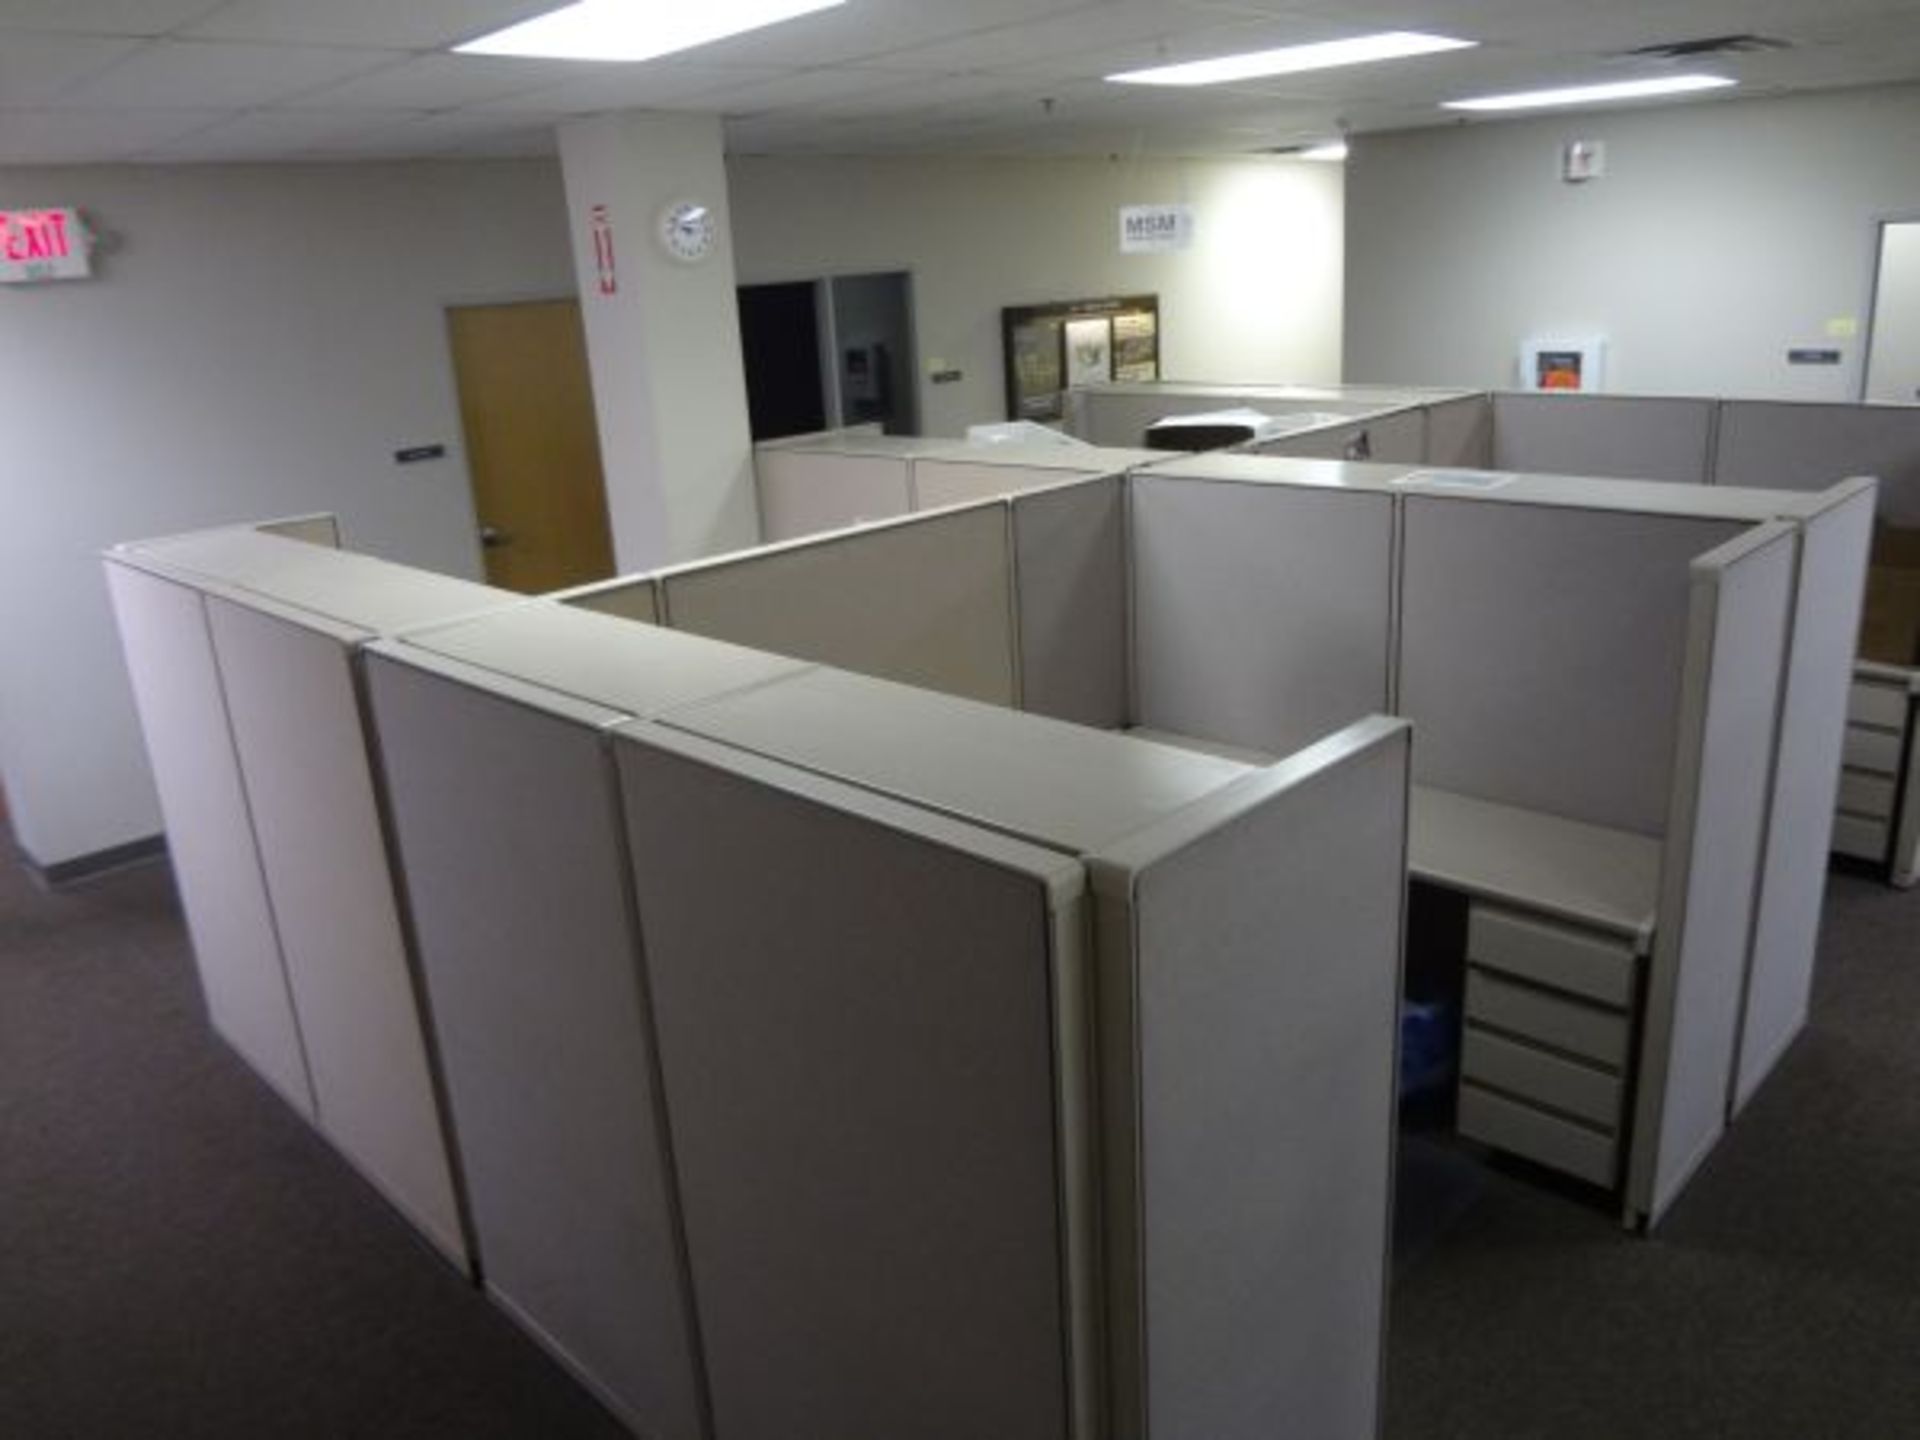 (LOT) 75" X 98" X 61" FOUR-PERSON STEELCASE MODULAR OFFICE INCLUDING (2) OVERHEAD CABINETS, (1) 3- - Image 4 of 5